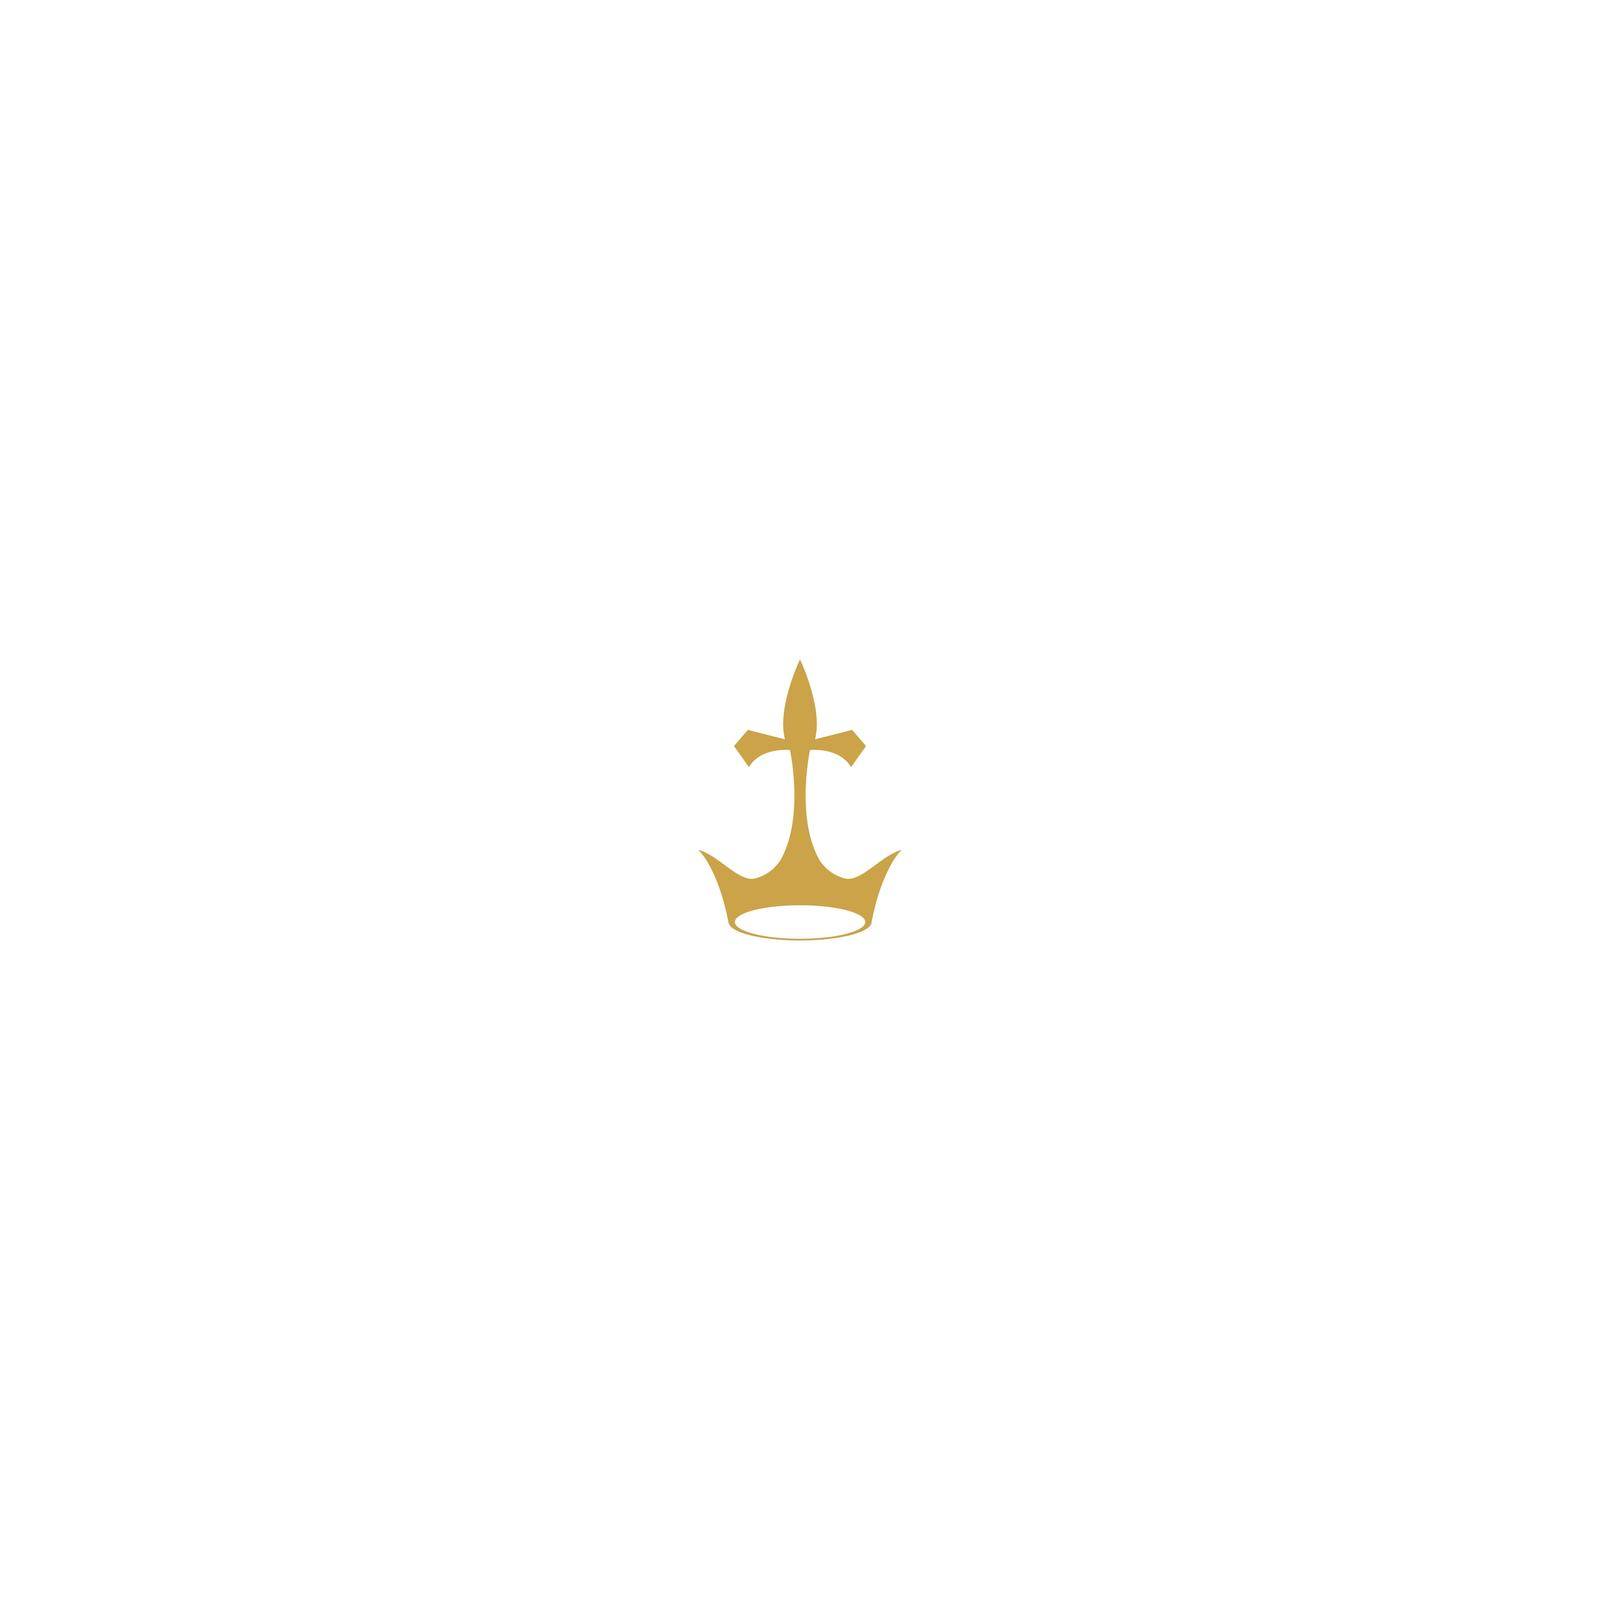 Crown Concept Logo icon Design by bellaxbudhong3